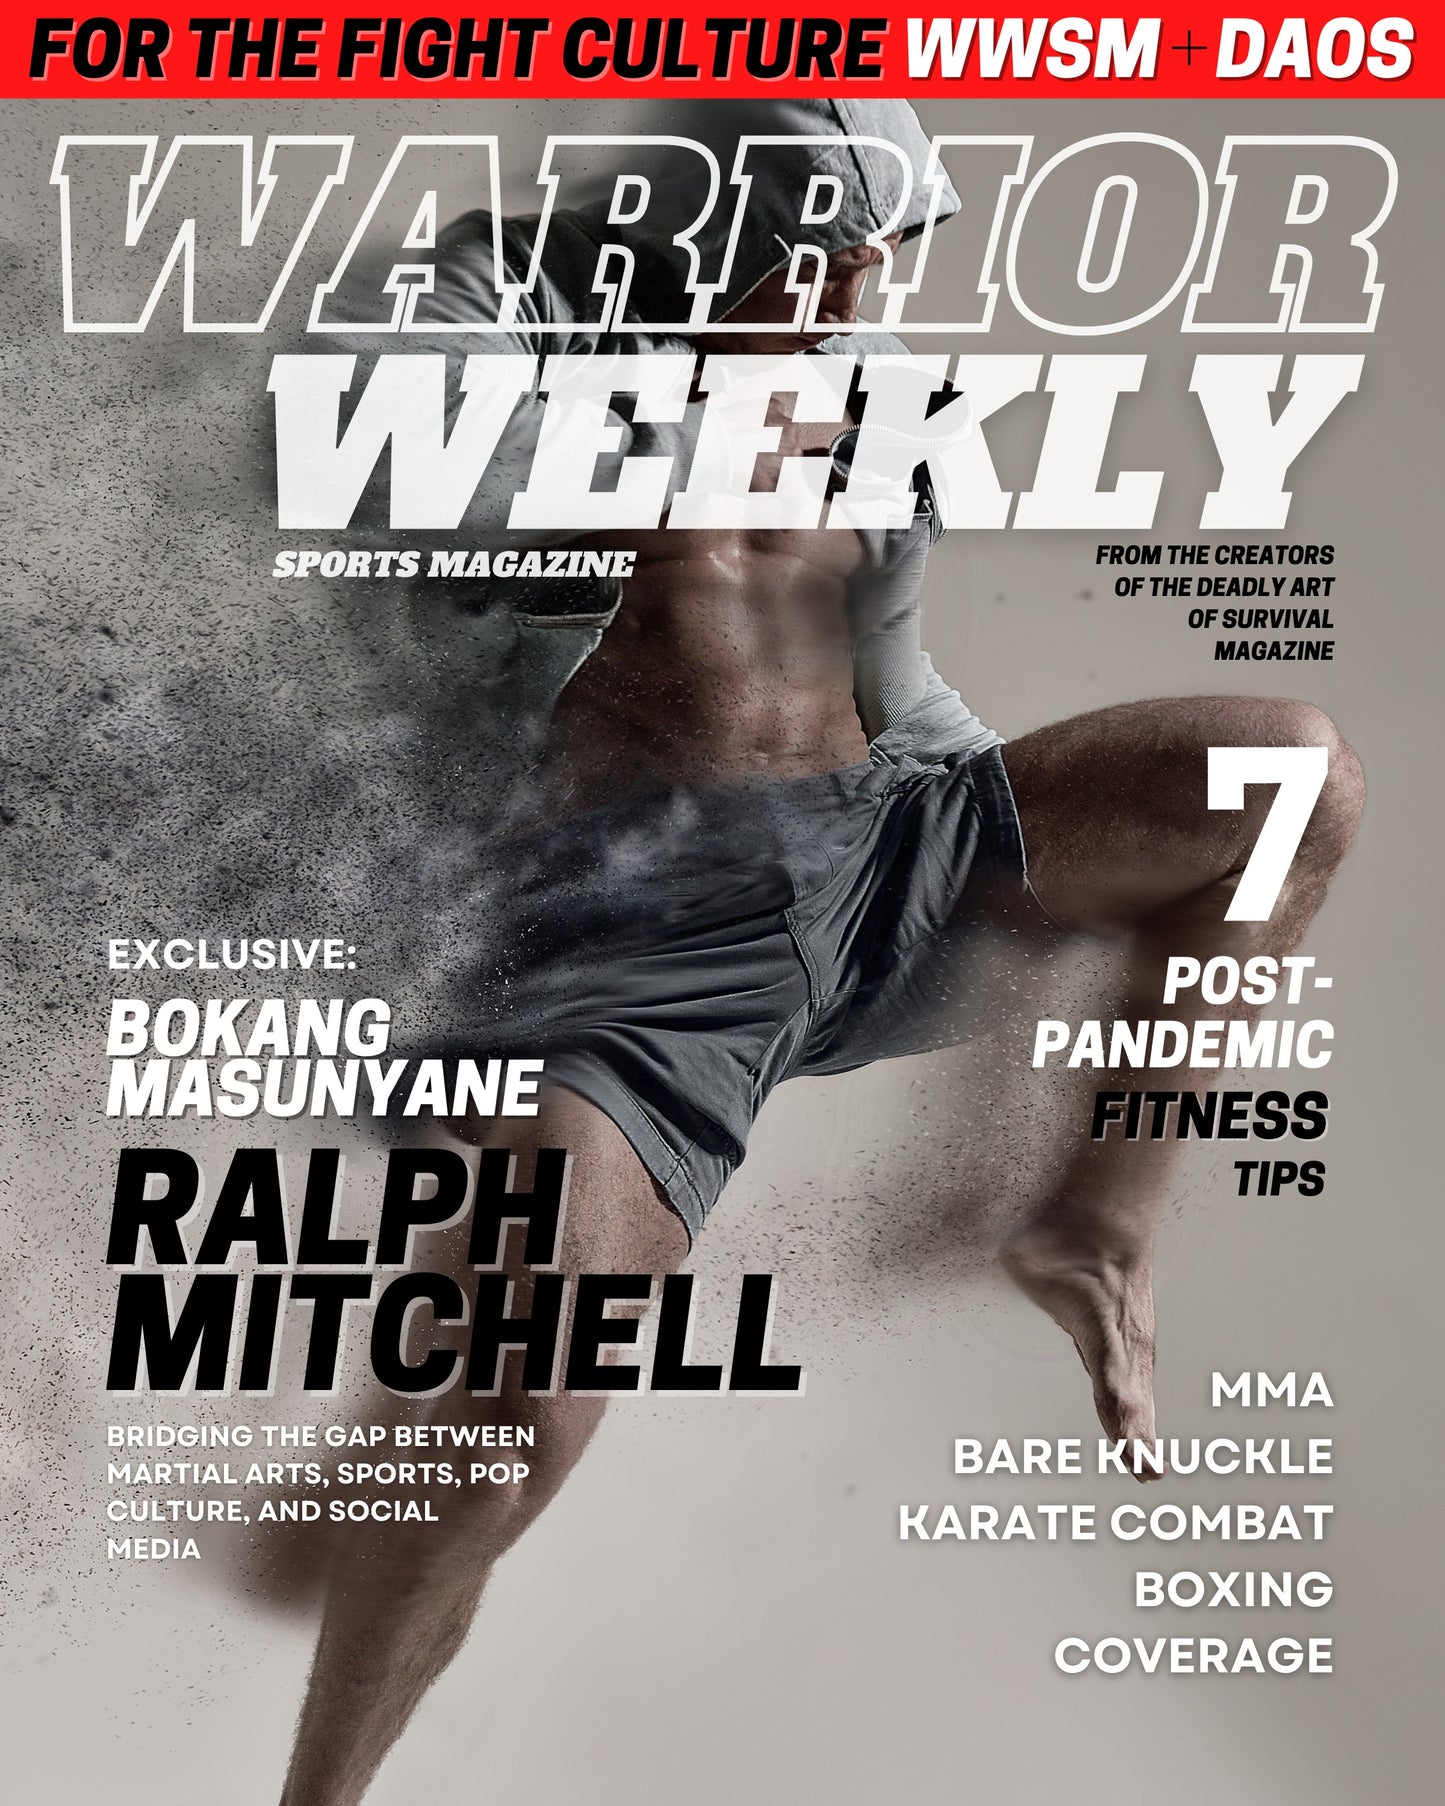 Warrior Weekly | For The Fight Culture Issue #1 deadlyartofsurvival.com